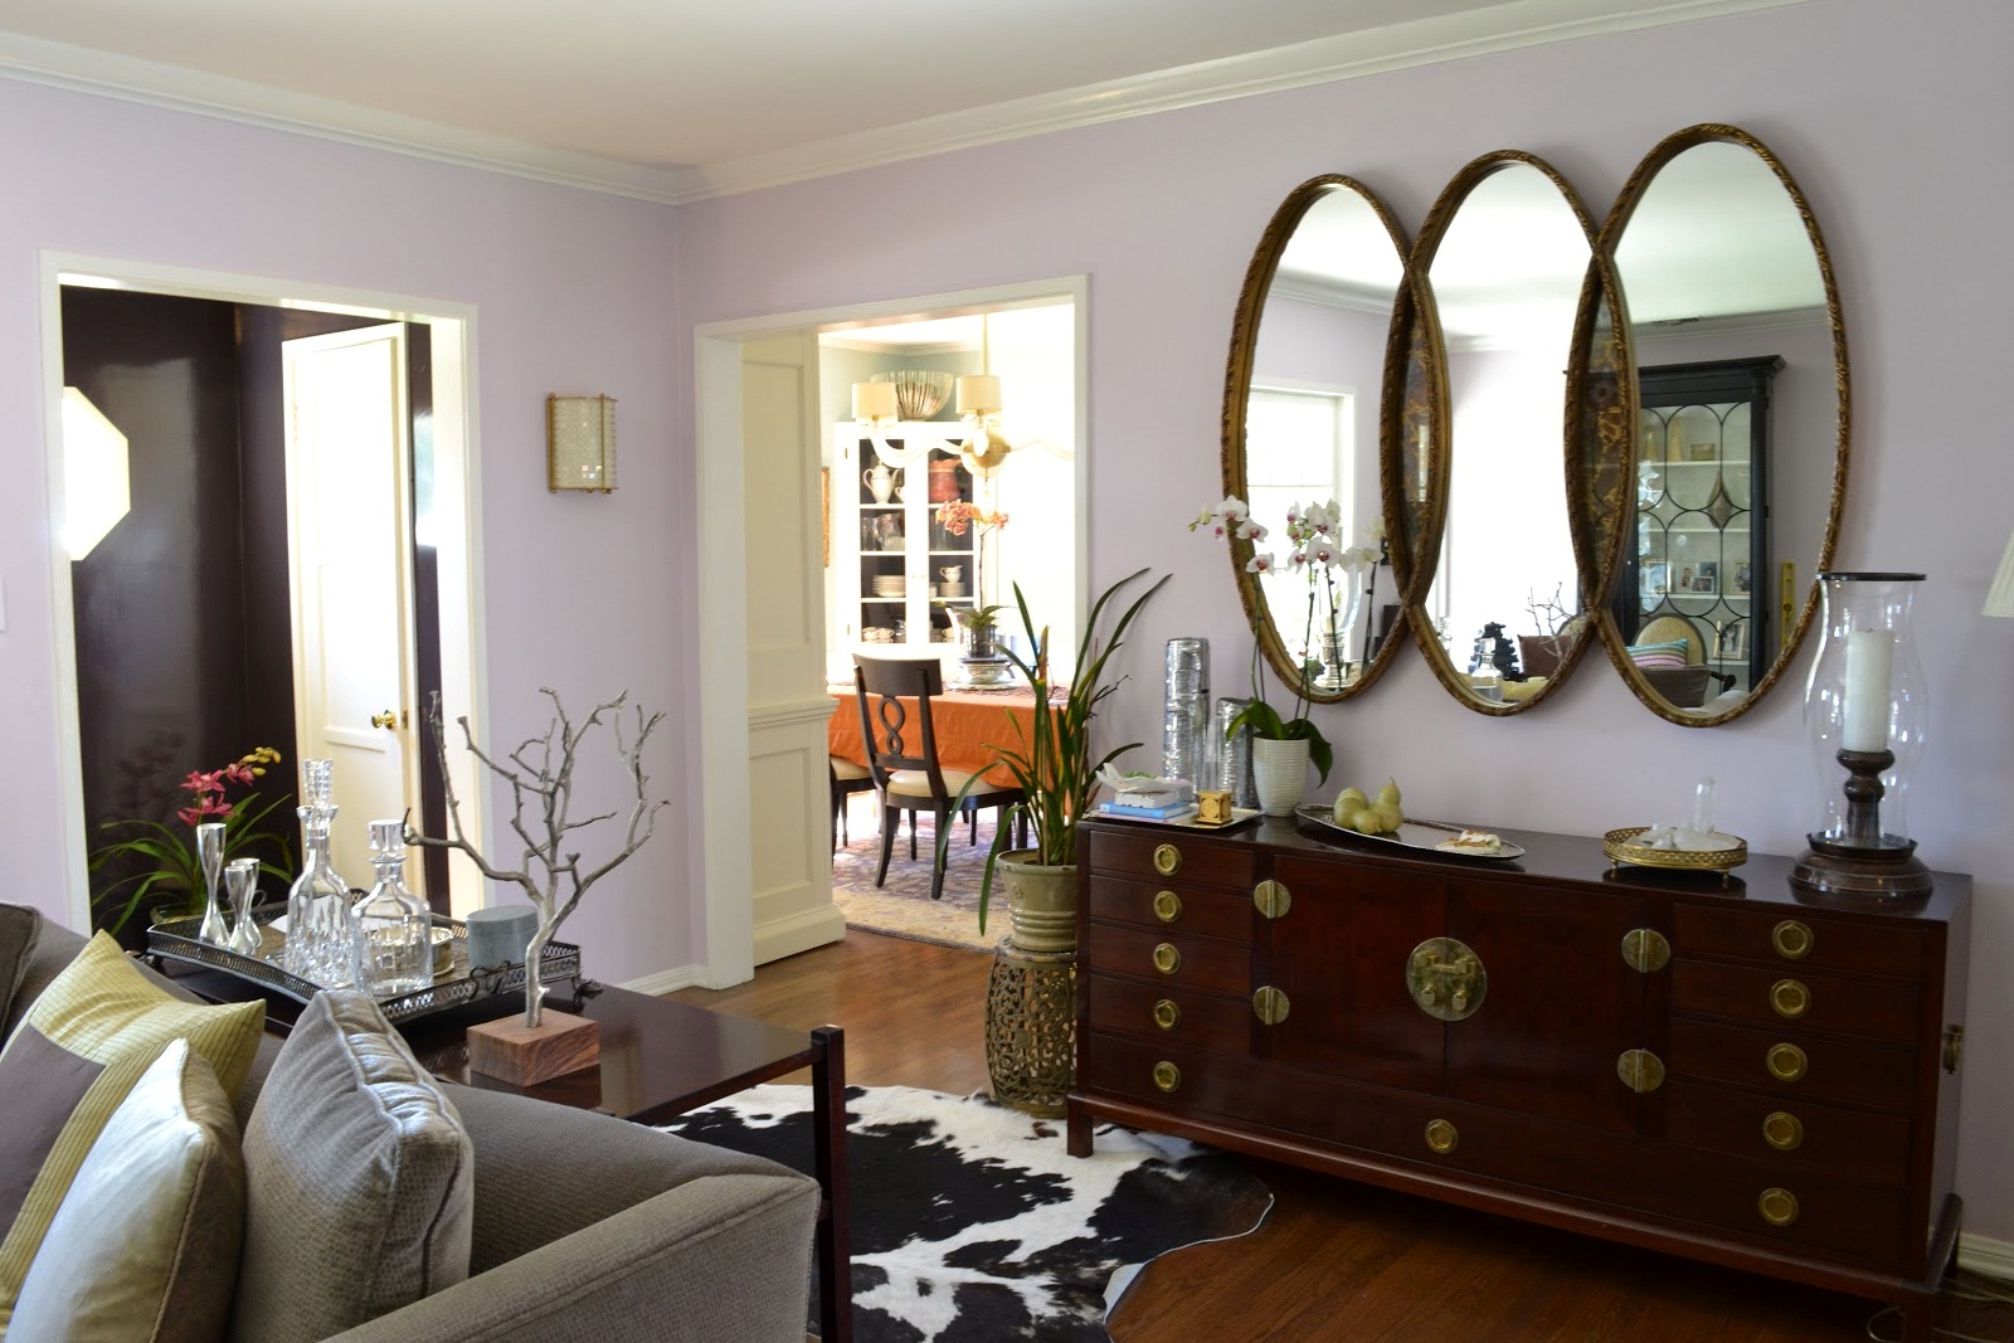 Allintitle:Decorative Wall Mirrors For Living Room